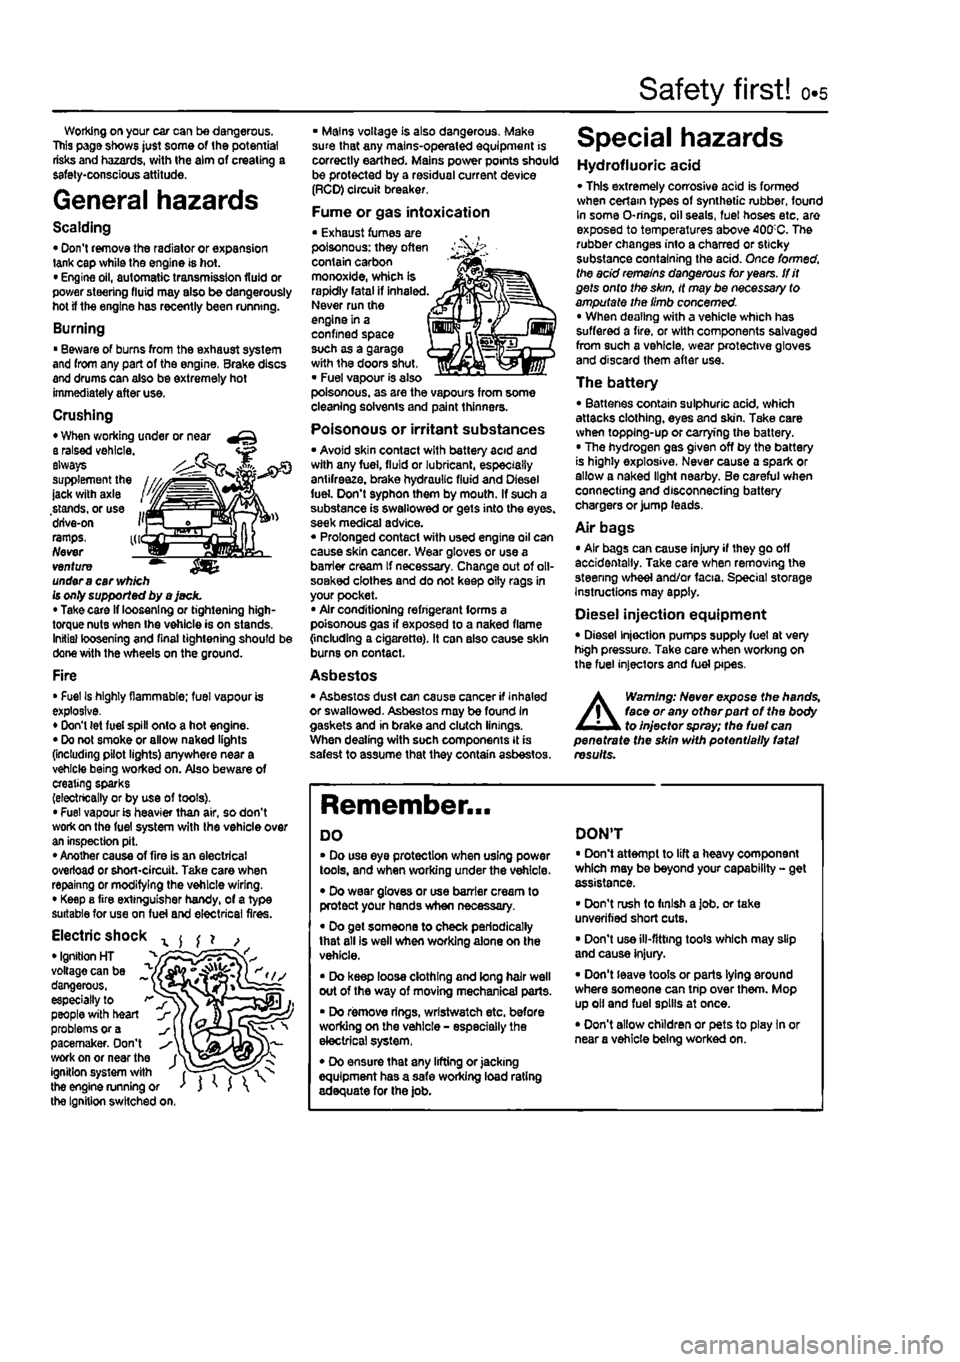 FIAT PUNTO 1996 176 / 1.G Workshop Manual 
Safety first! 0.5 
Working on your ear can be dangerous. This page shows just some of the potential risks and hazards, with the aim of creating a safety-conscious attitude. 
General hazards 
Scalding